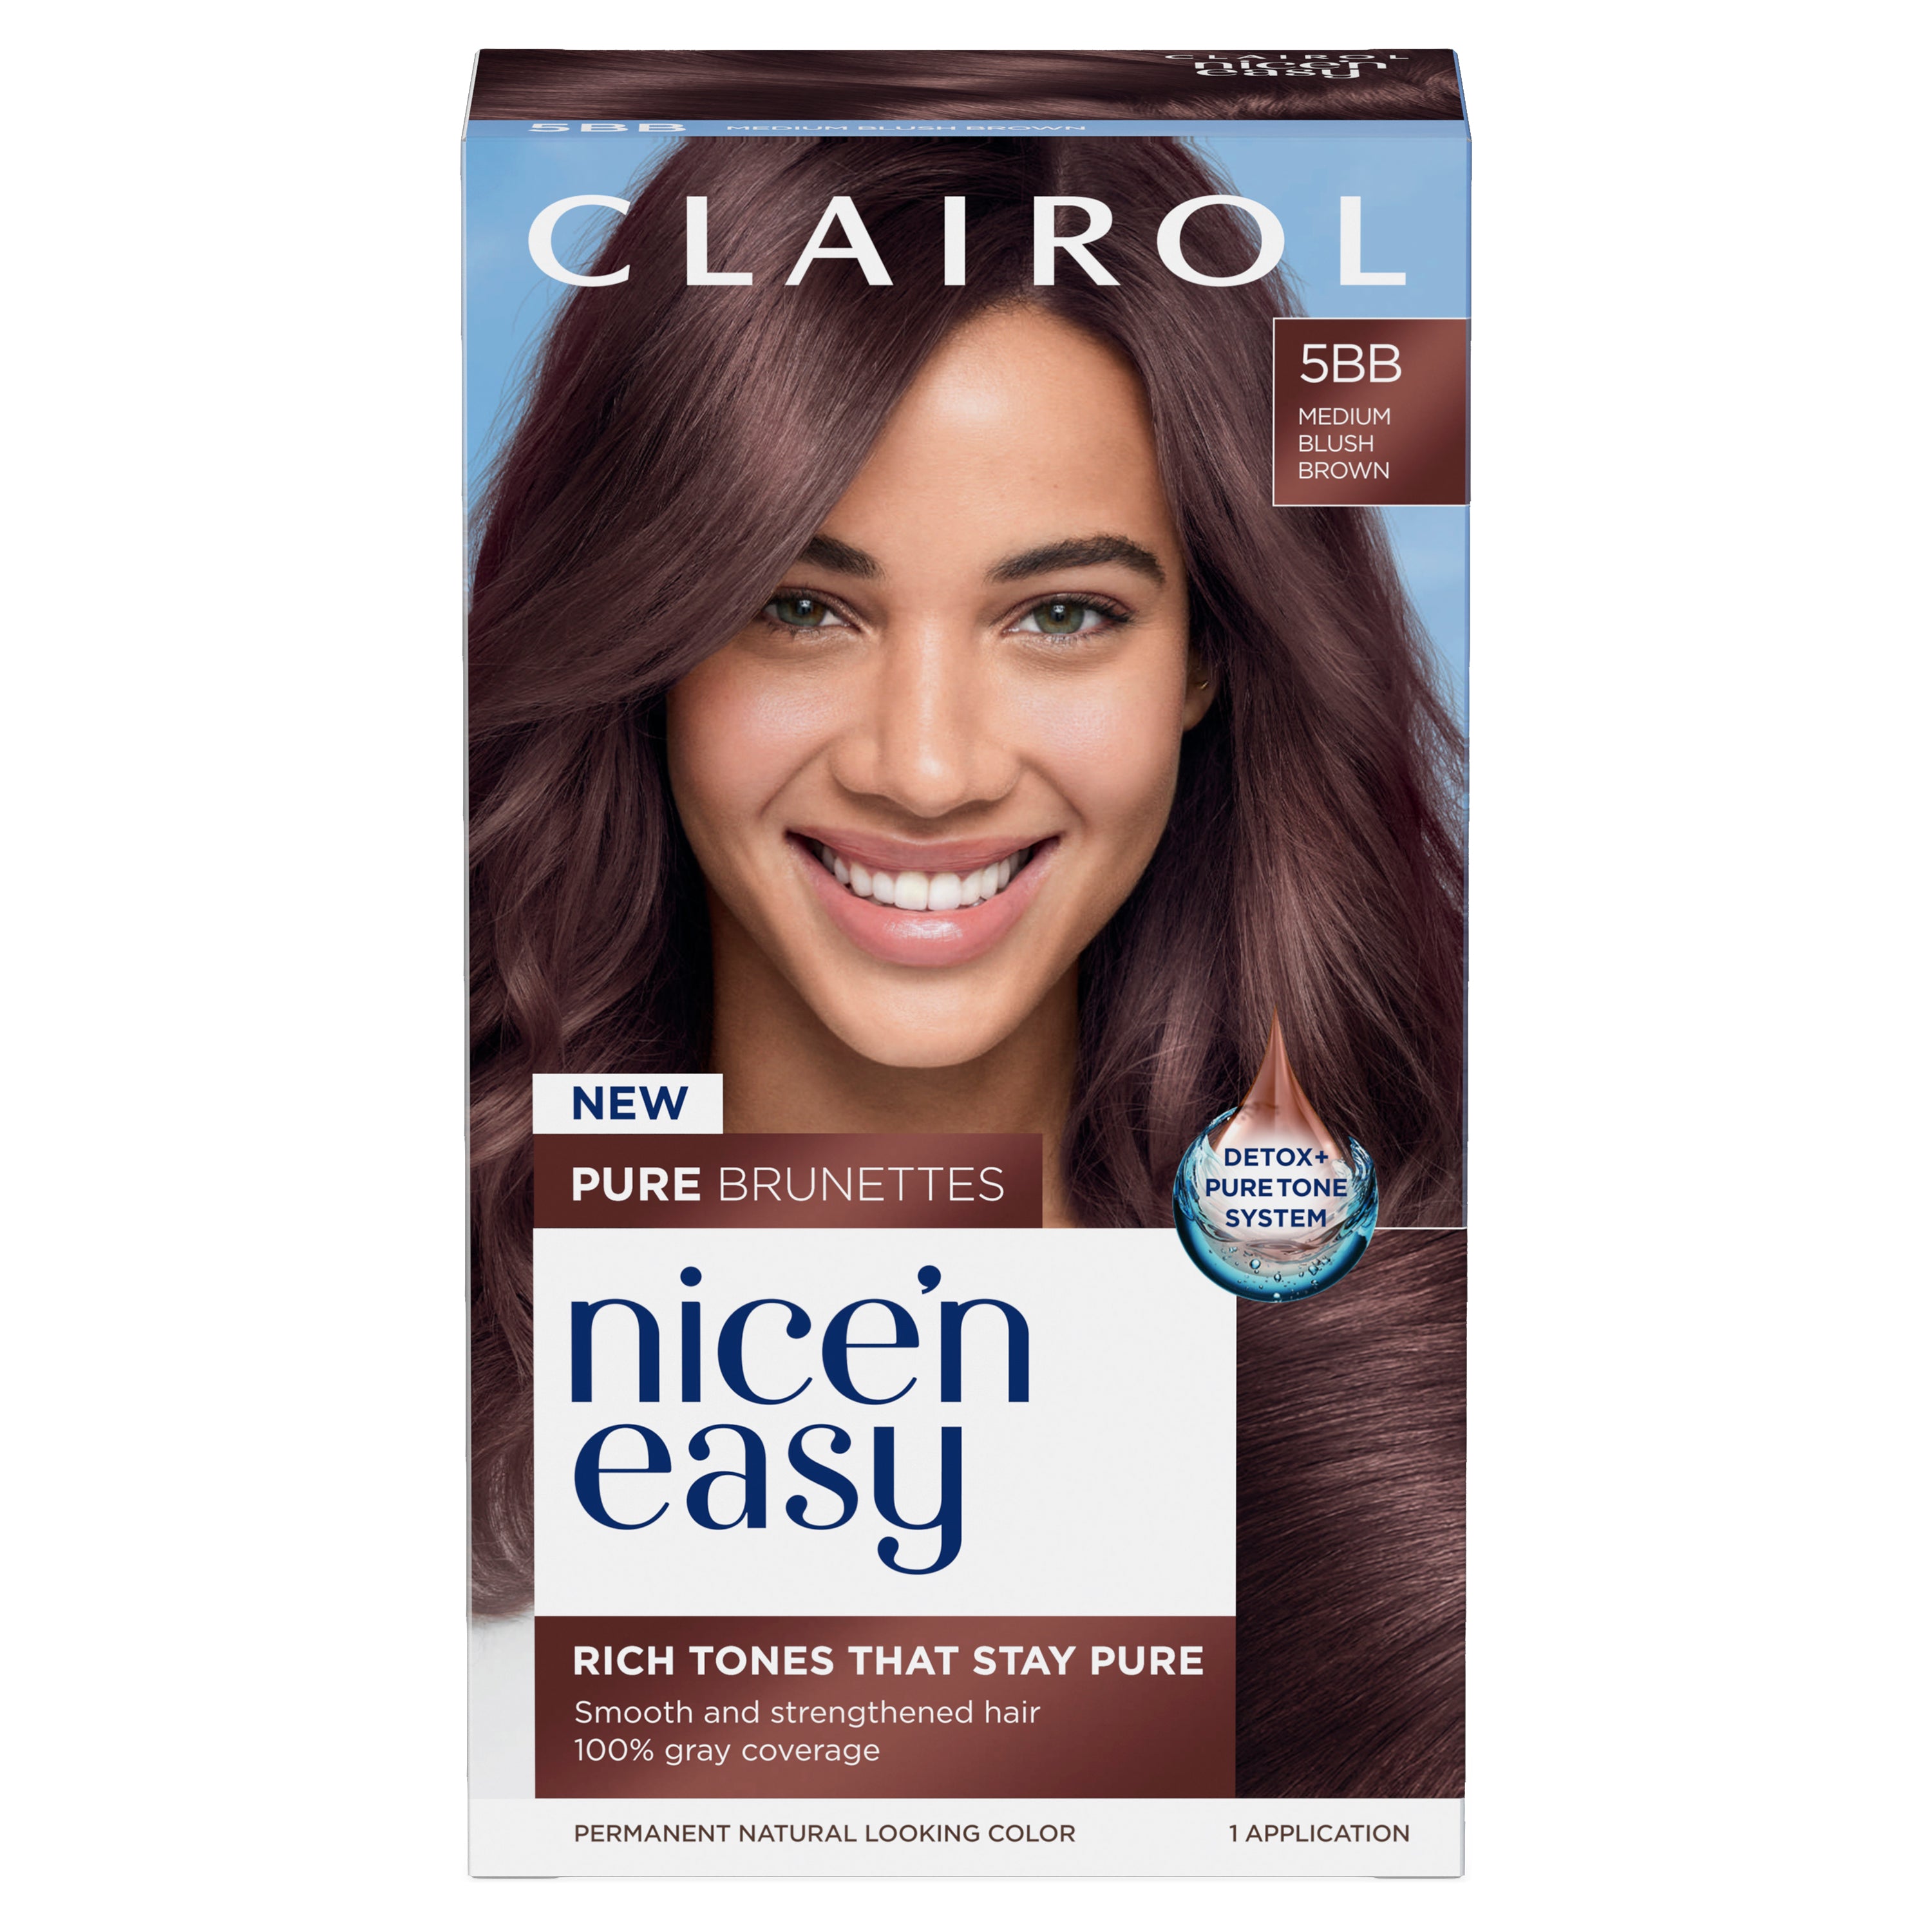 Clairol Products  Clairol Distributor S4P Medium Cool blonde 7A